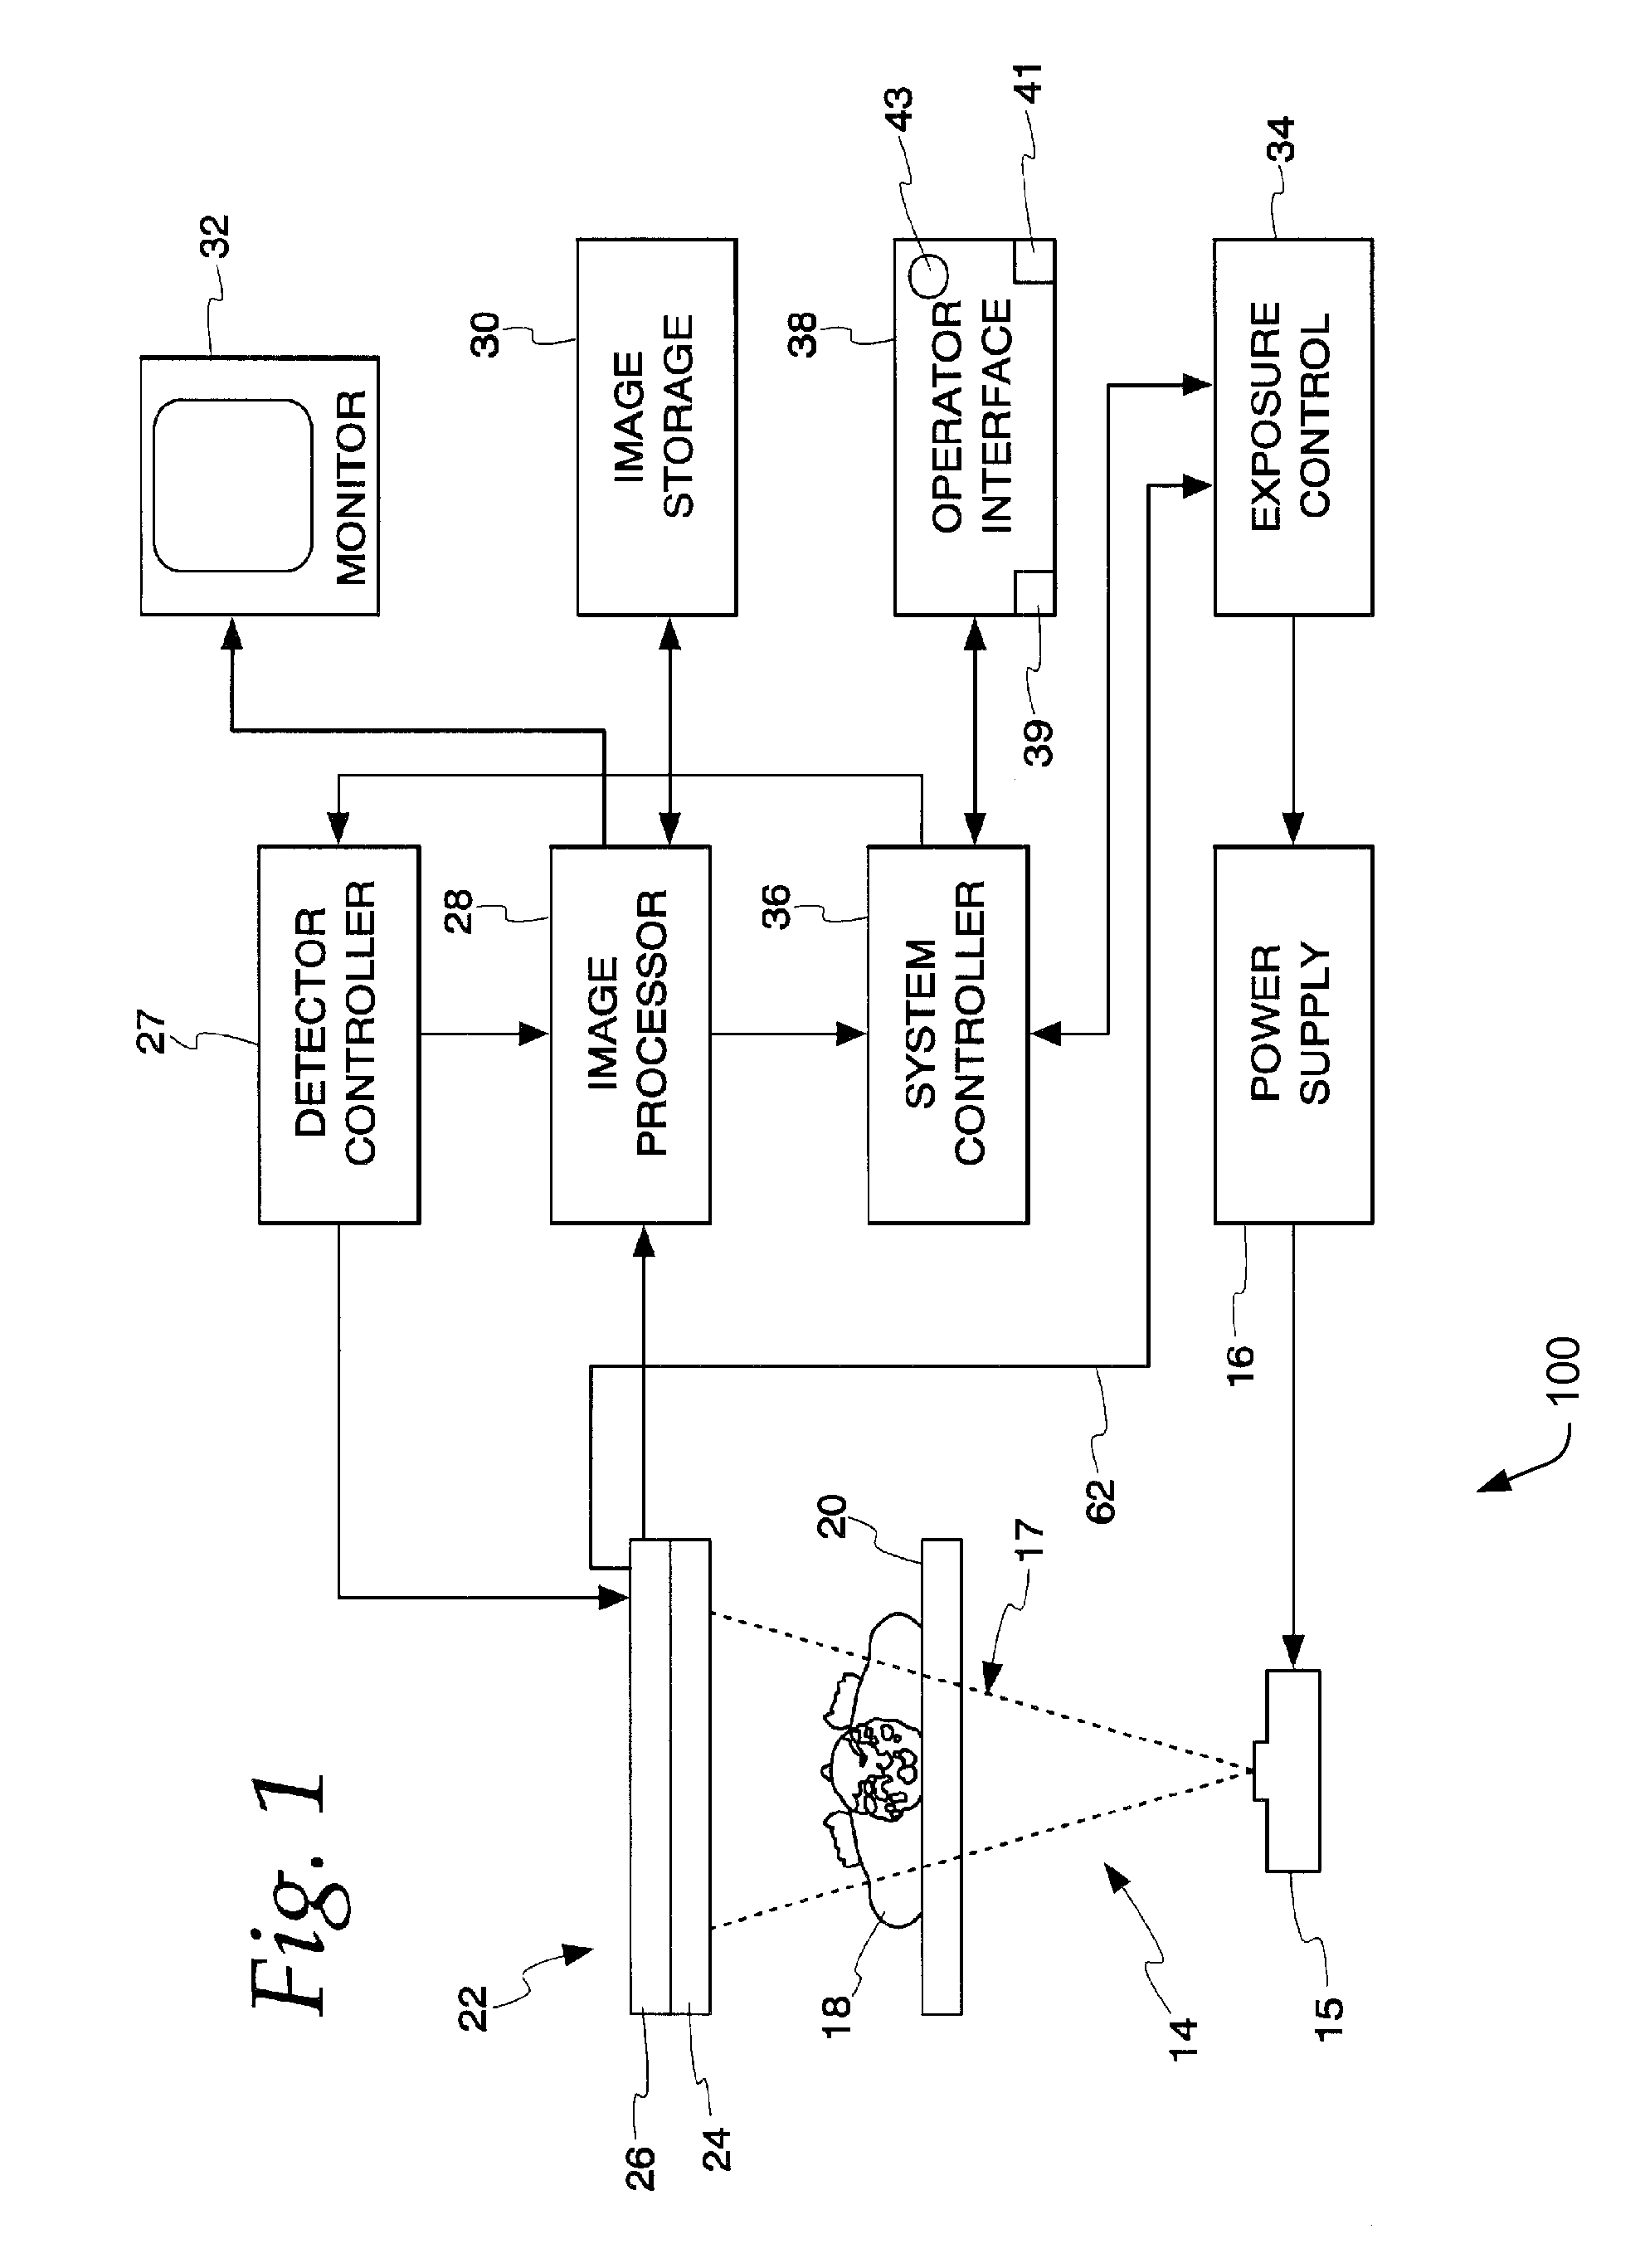 Systems and methods for interactive image registration